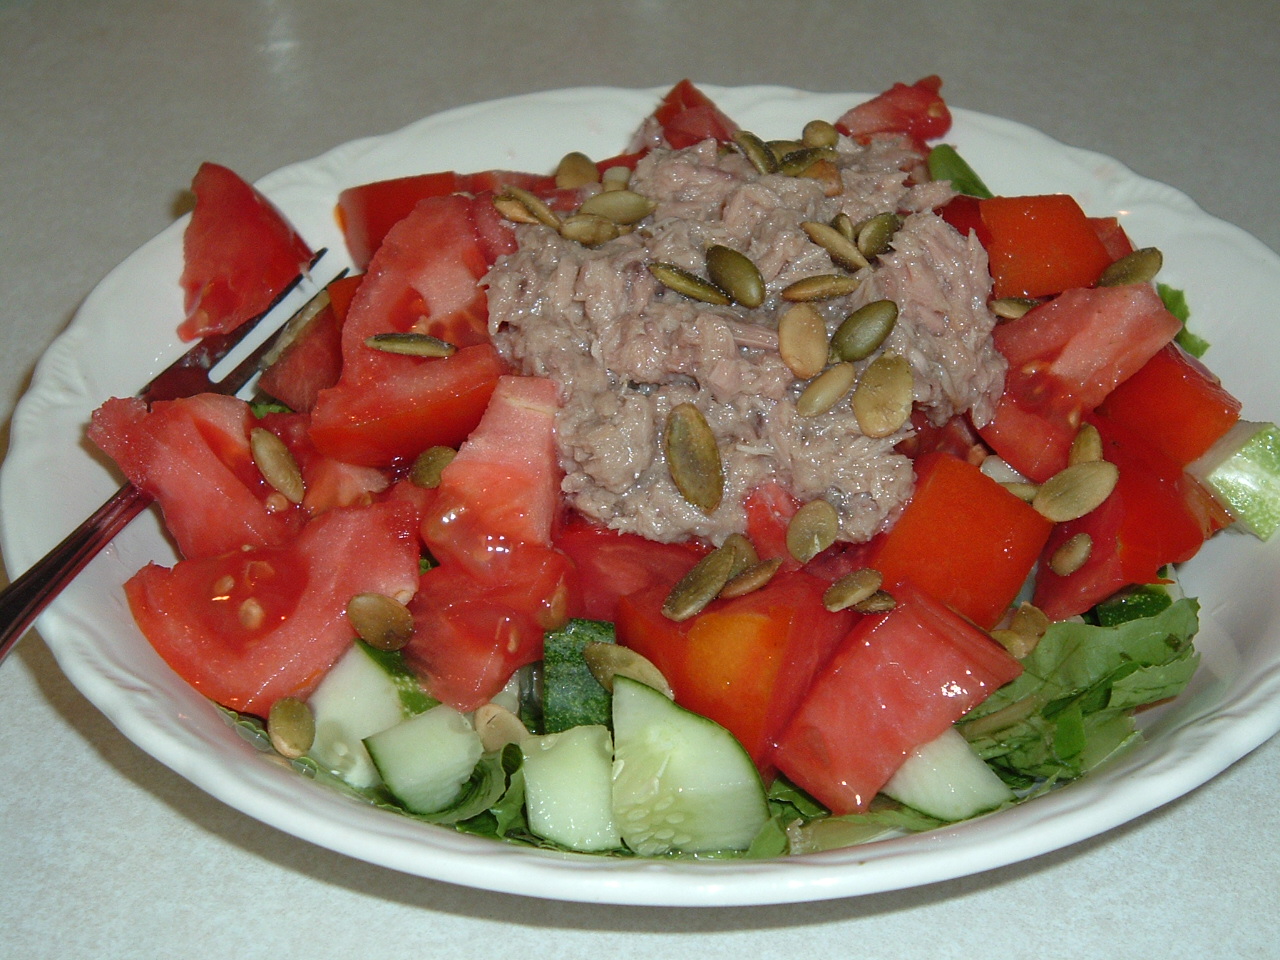 the salad has slices of watermelon, cucumber, tomatoes and seeds on it